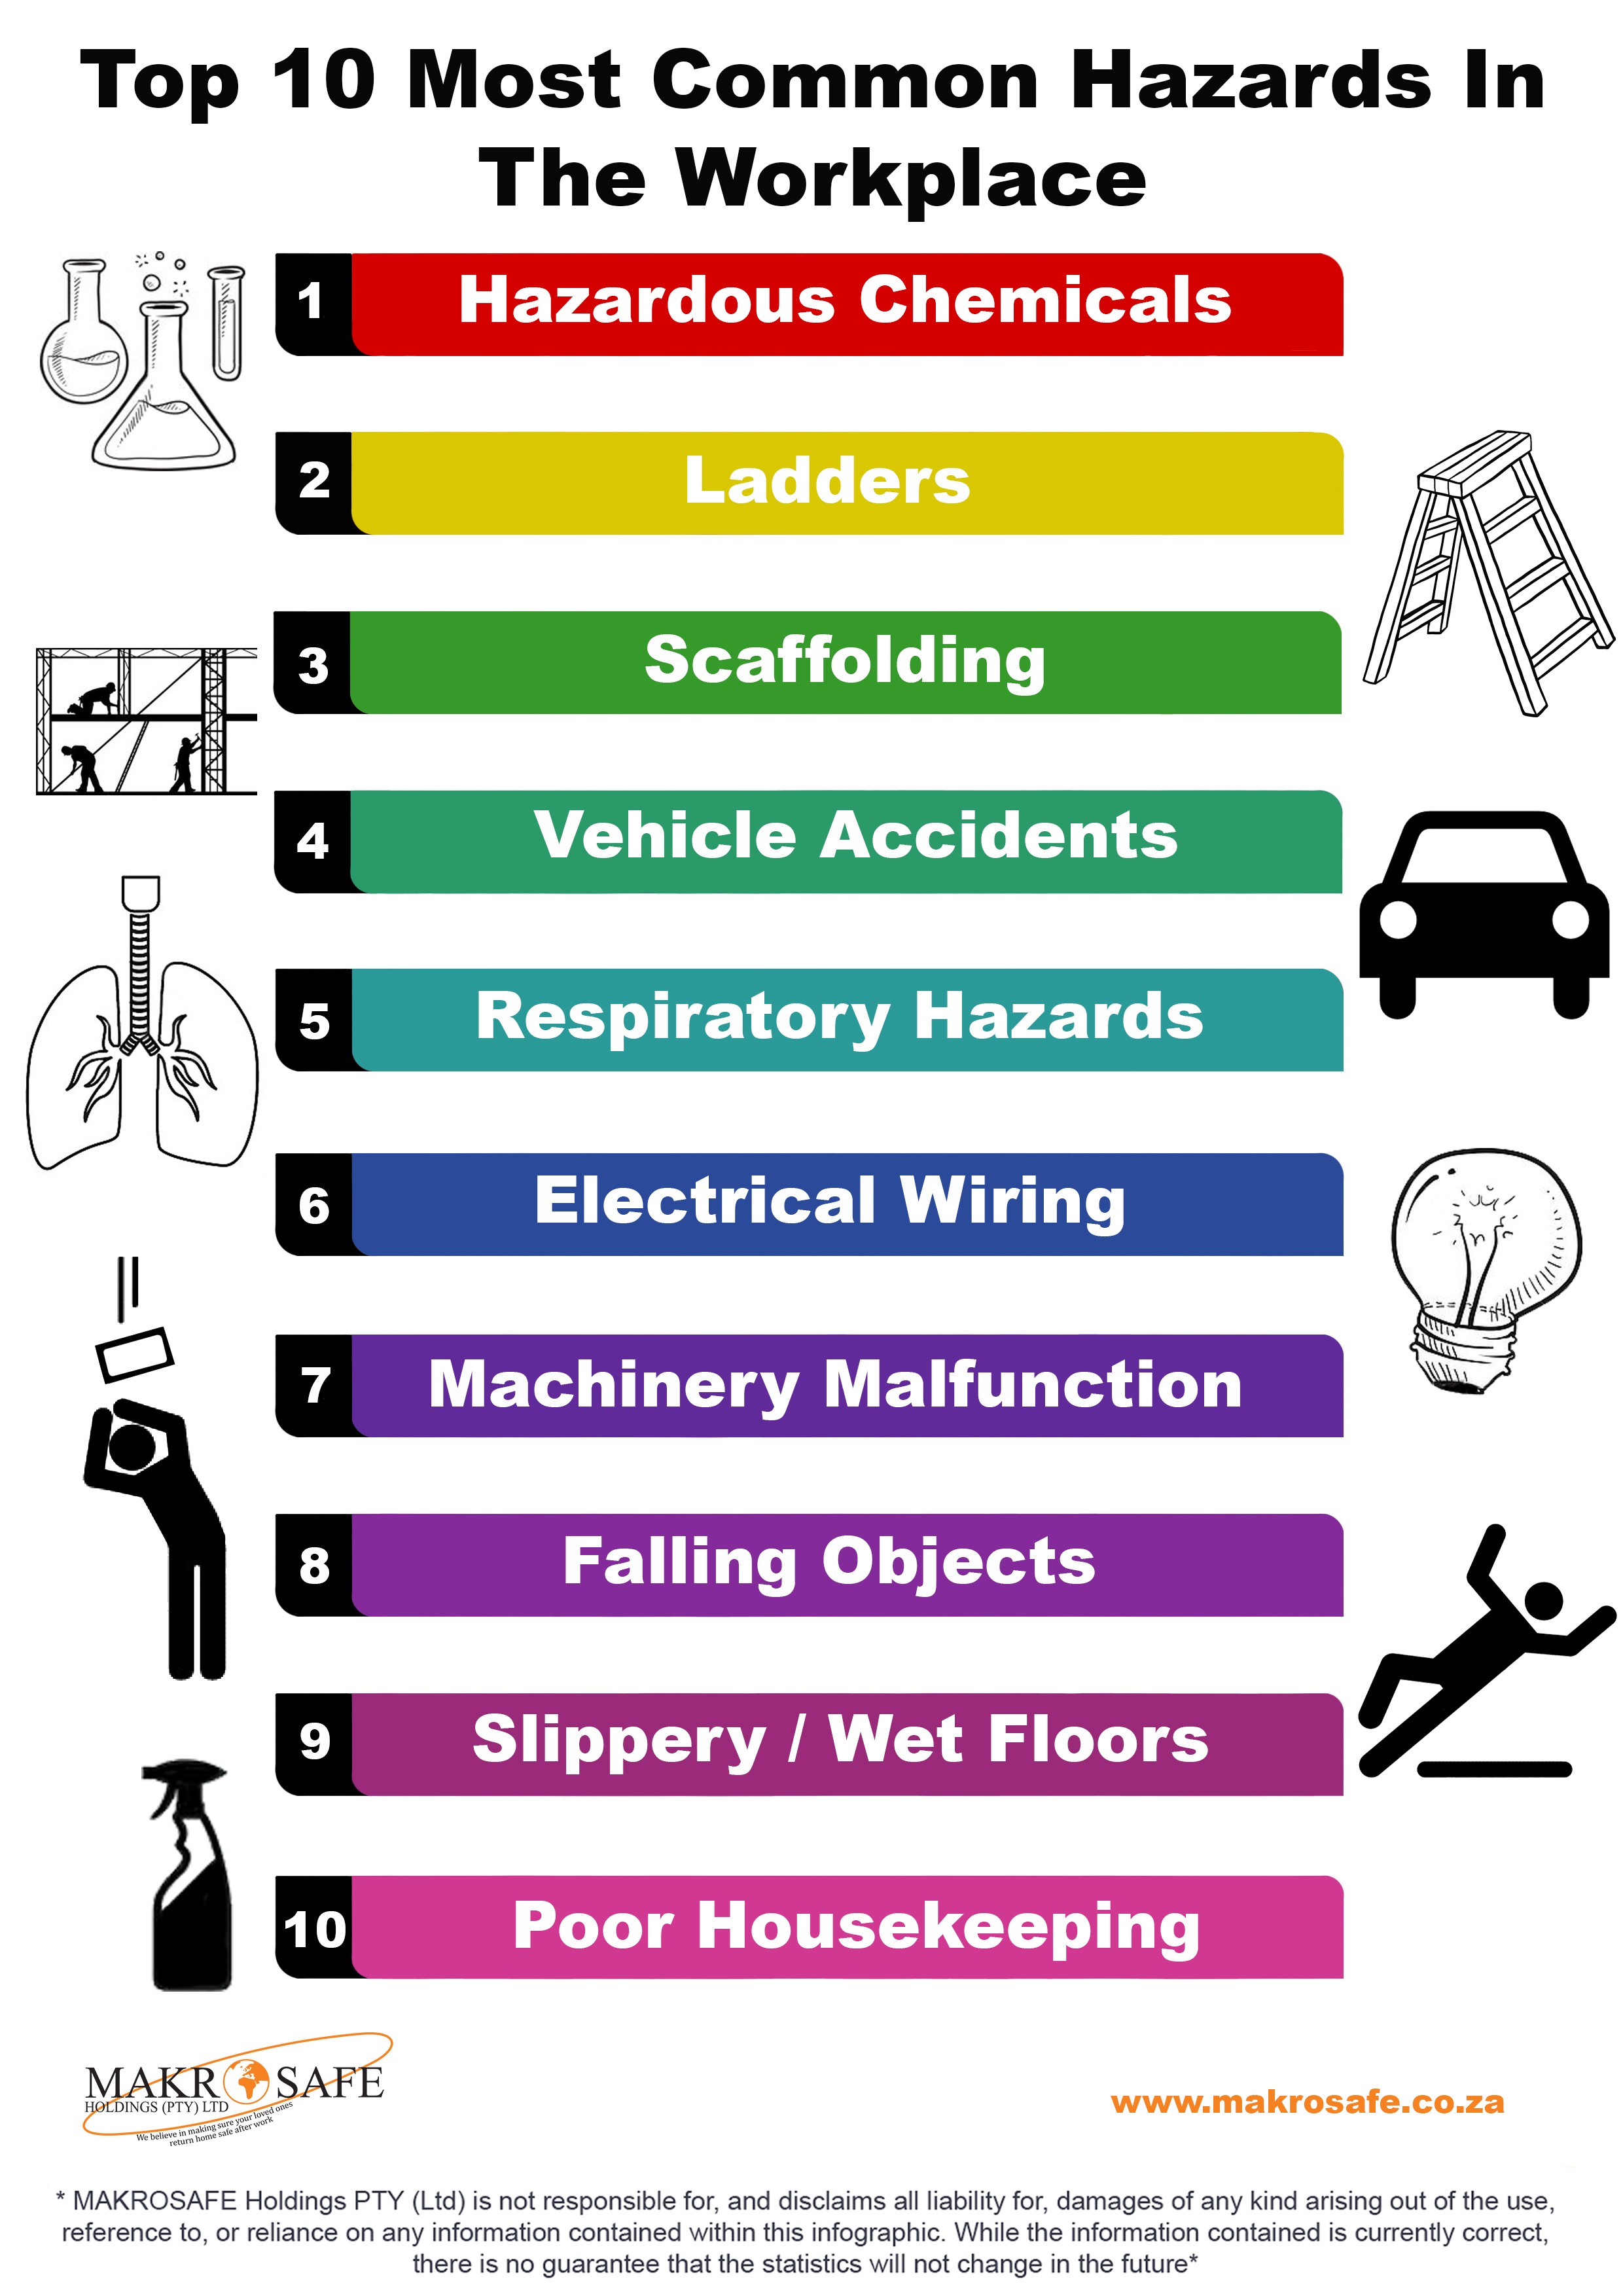 Top 10 Most Common Hazards In The Workplace 04A